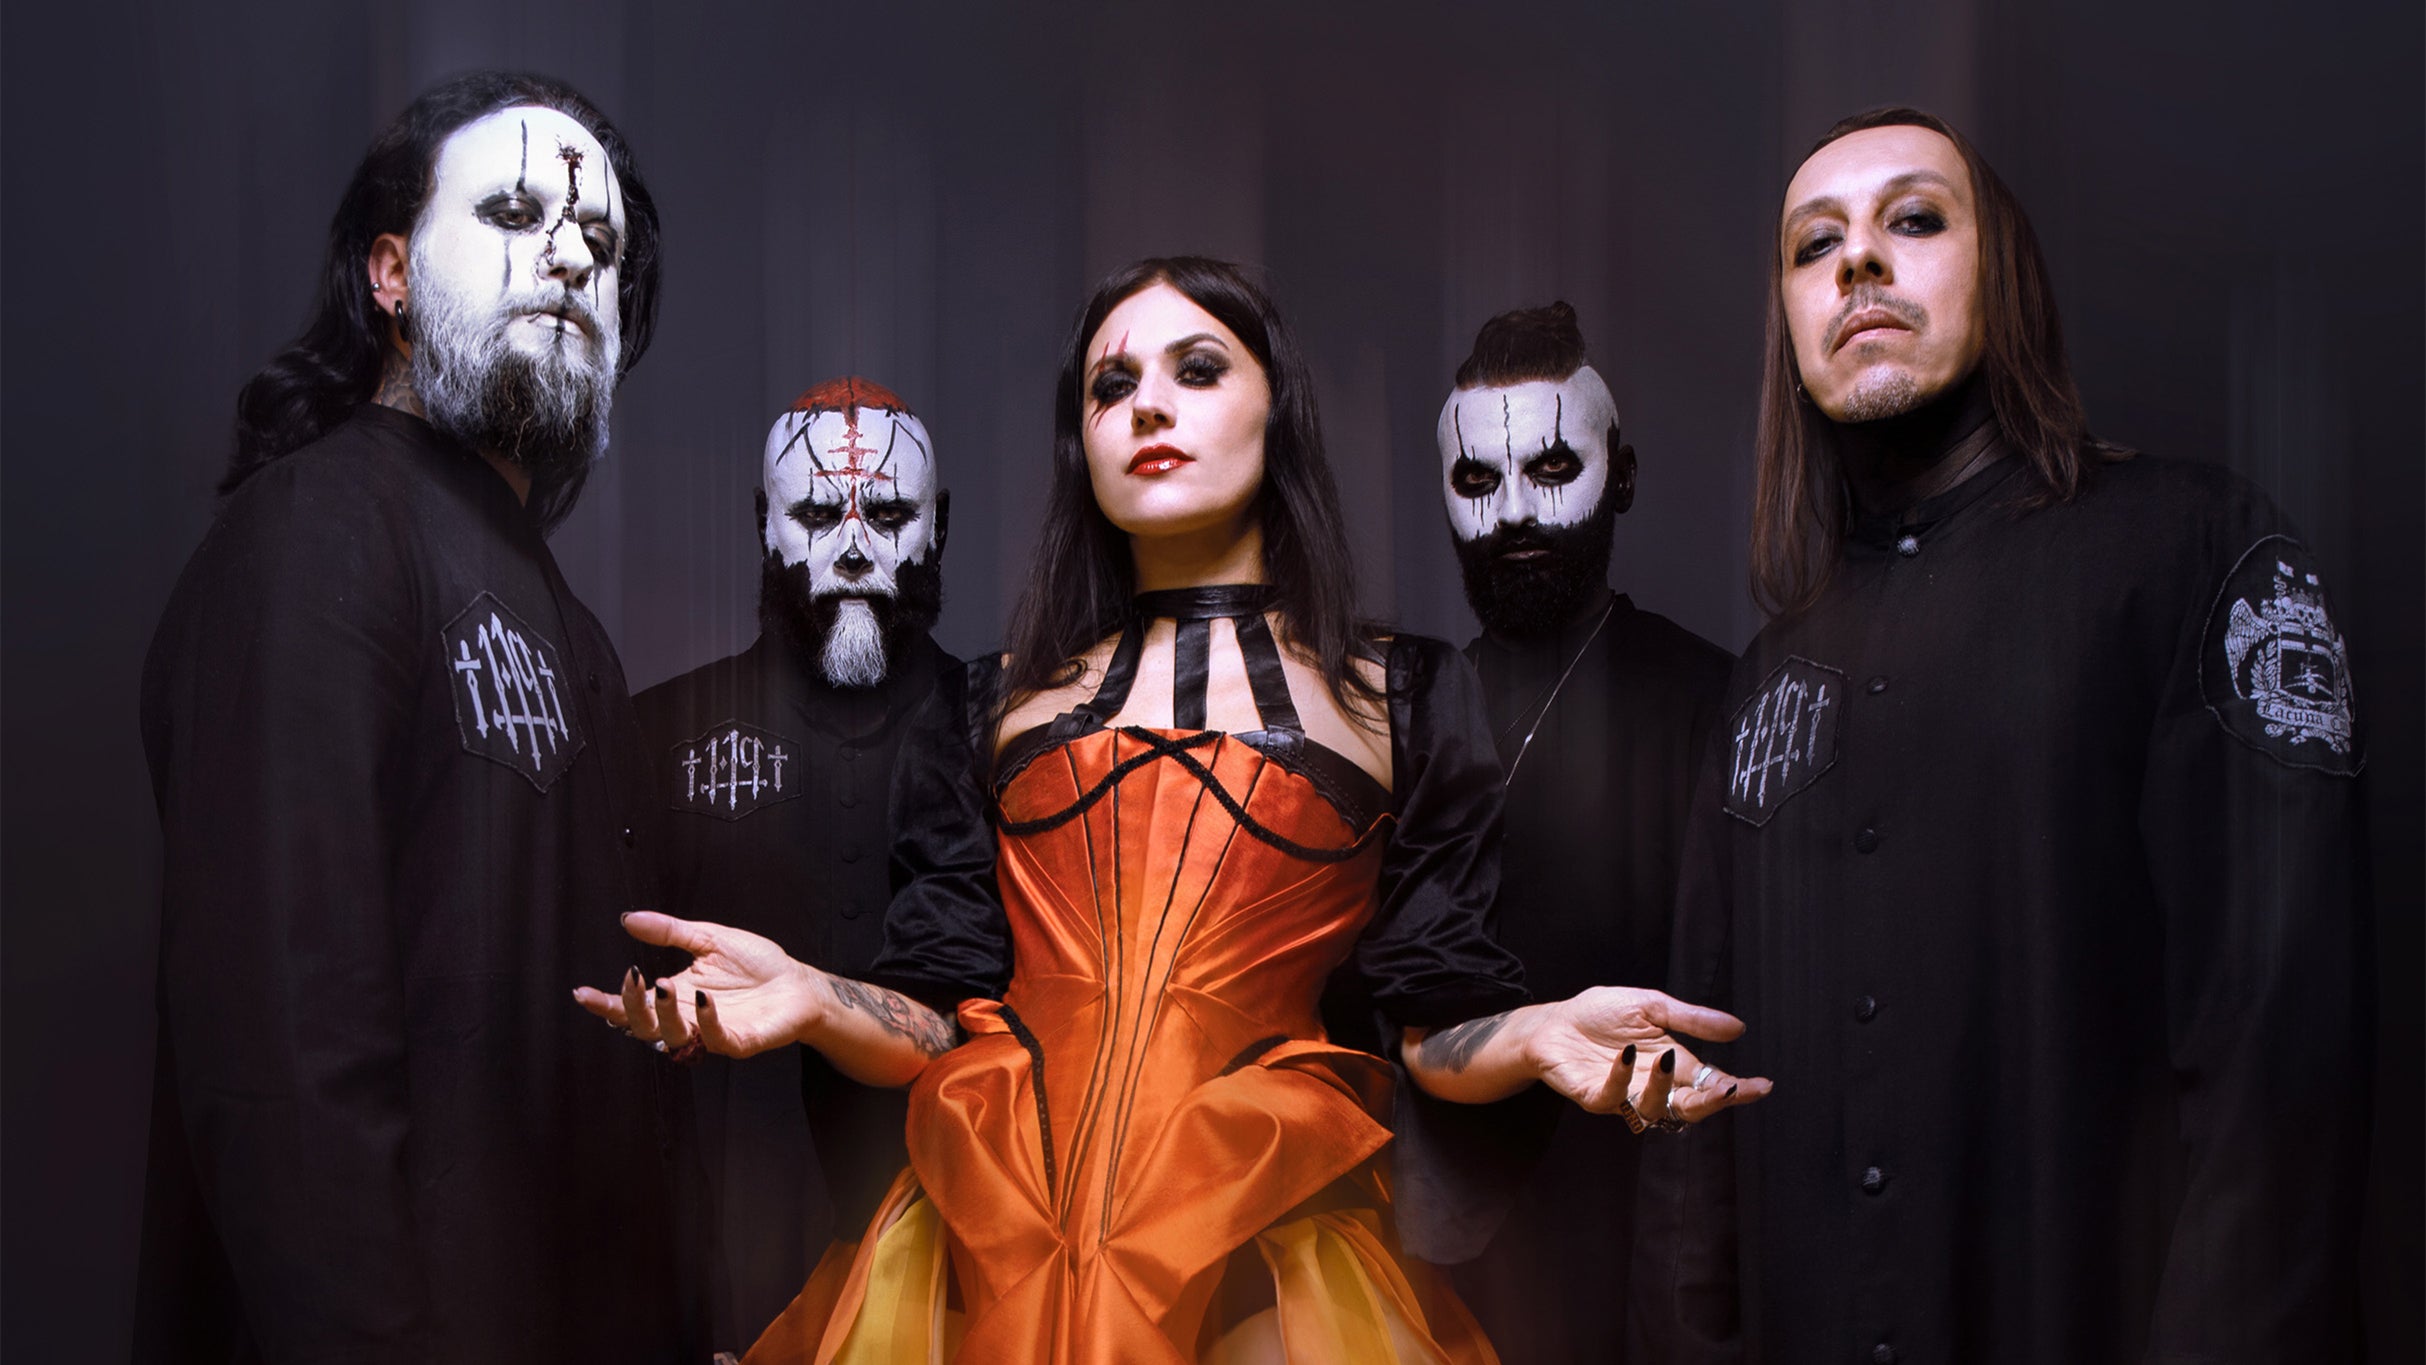 LACUNA COIL Ignite The Fire Tour w/ NEW YEAR'S DAY & OCEANS OF SLUMBER pre-sale code for your tickets in Charlotte